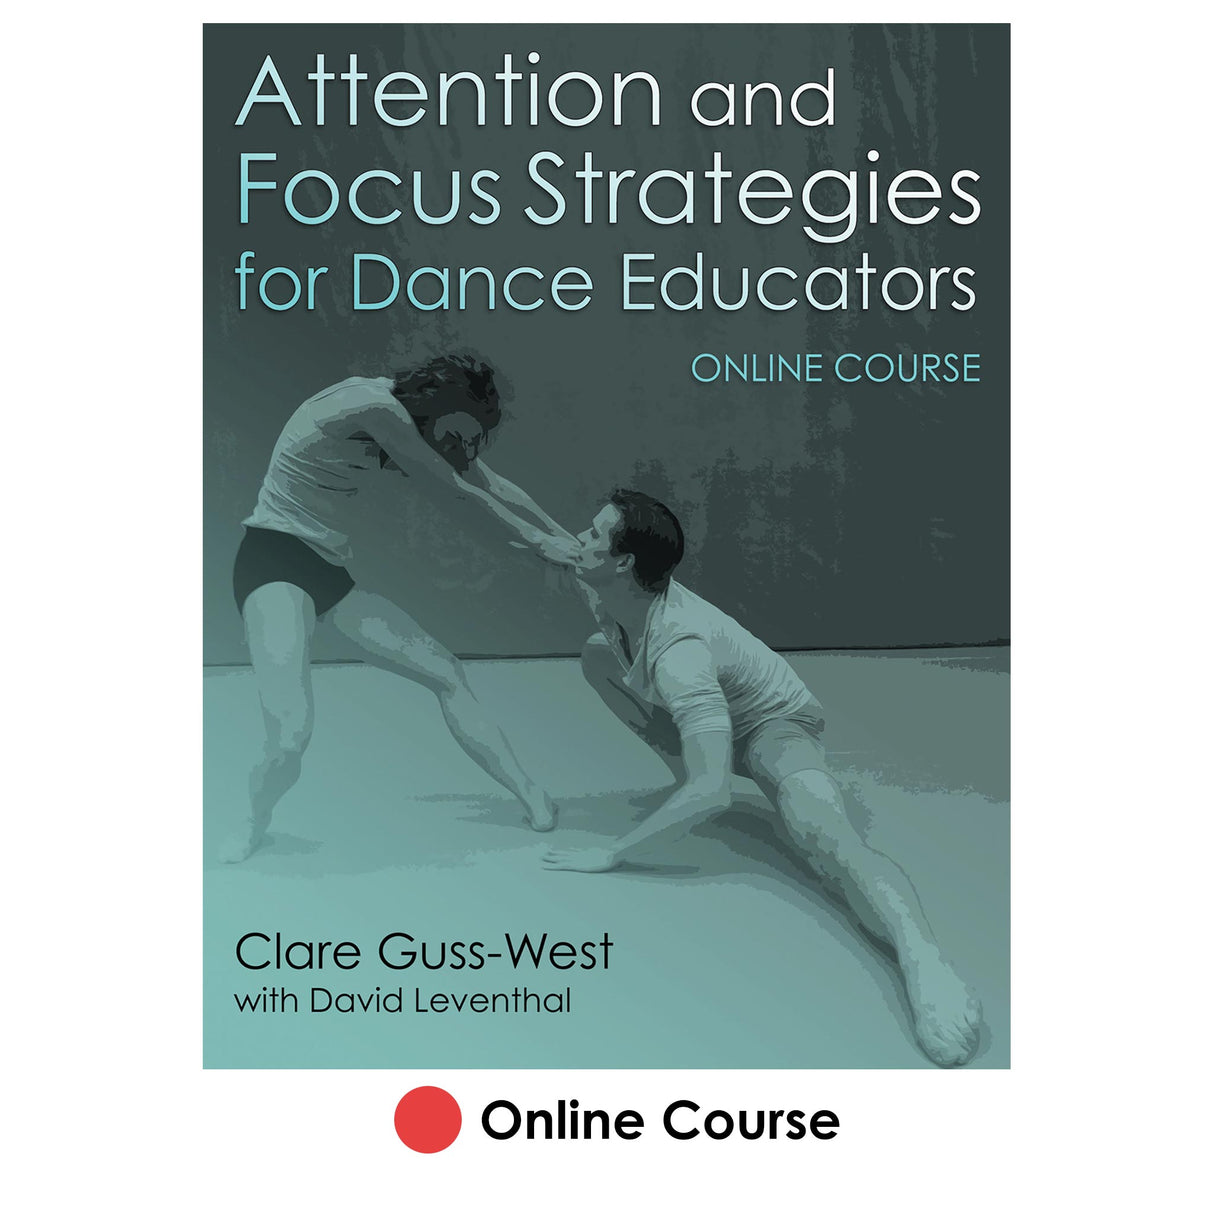 Attention and Focus Strategies for Dance Educators Online Course